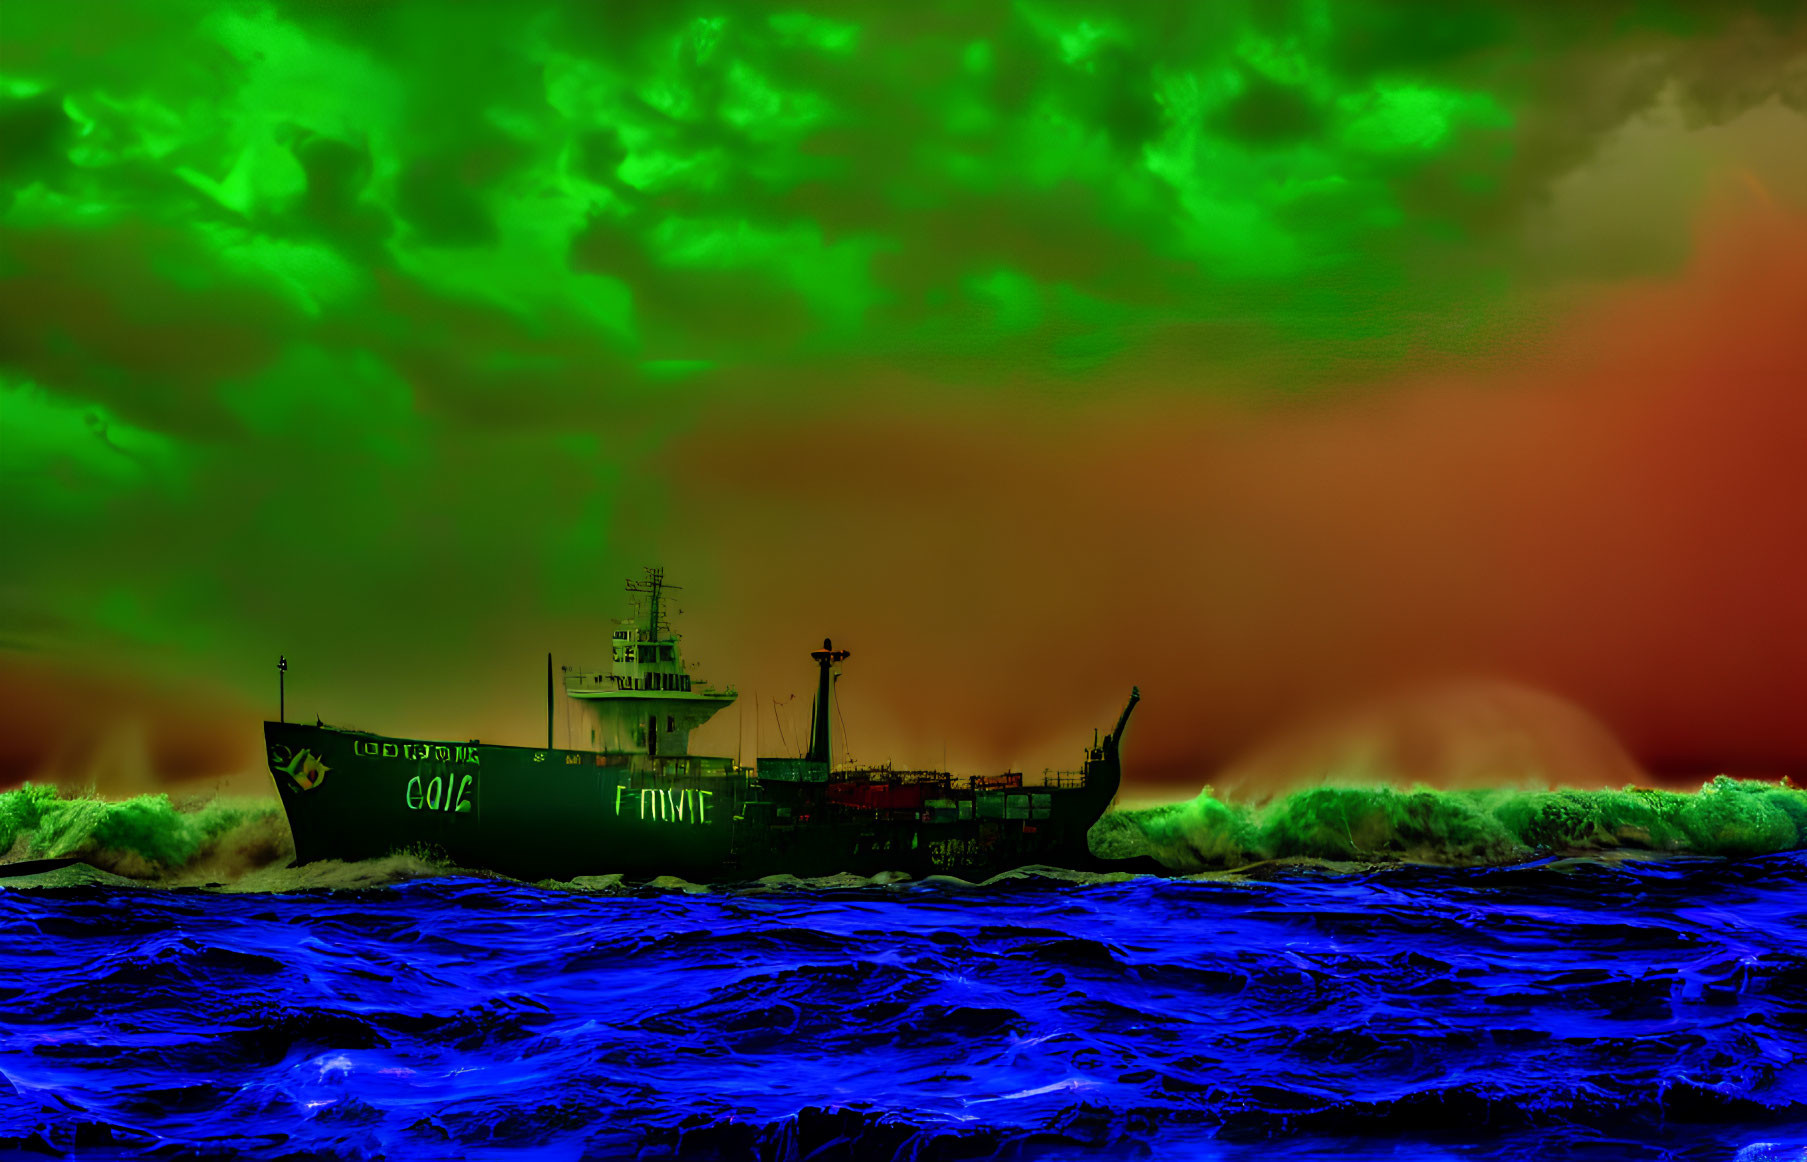 Color-altered cargo ship image with surreal green skies and blue waves